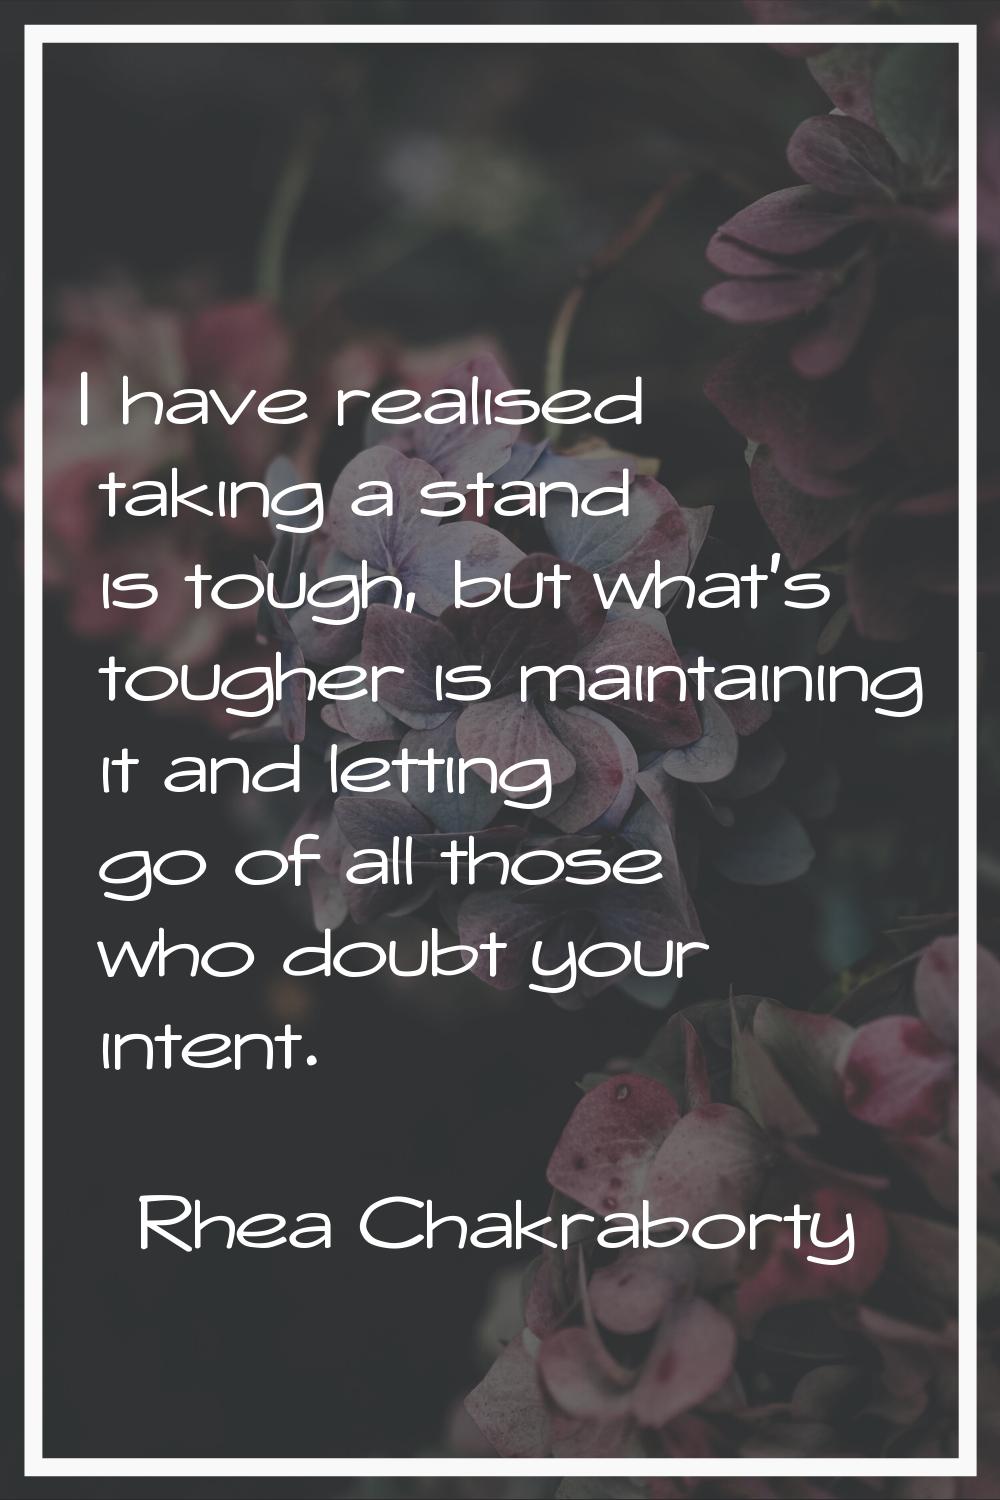 I have realised taking a stand is tough, but what's tougher is maintaining it and letting go of all